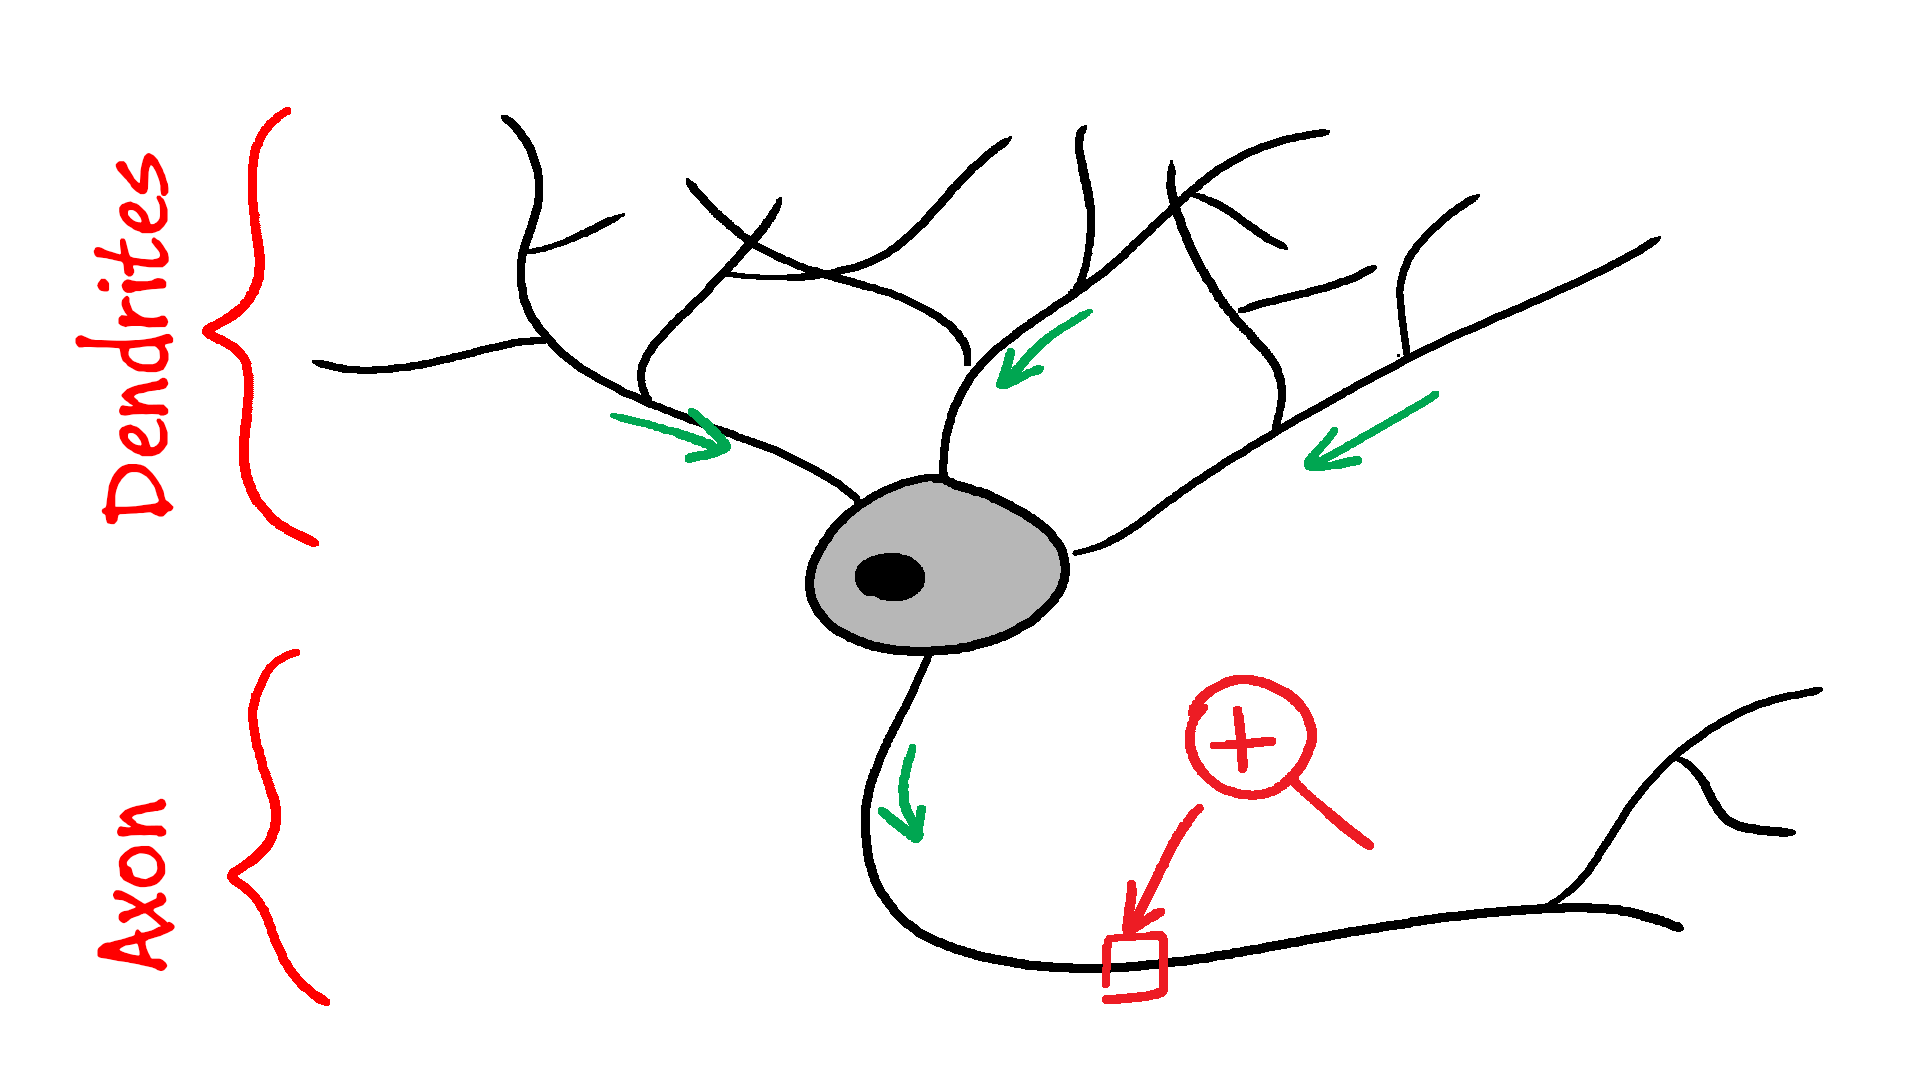 A typical neuron. Source: your brain.